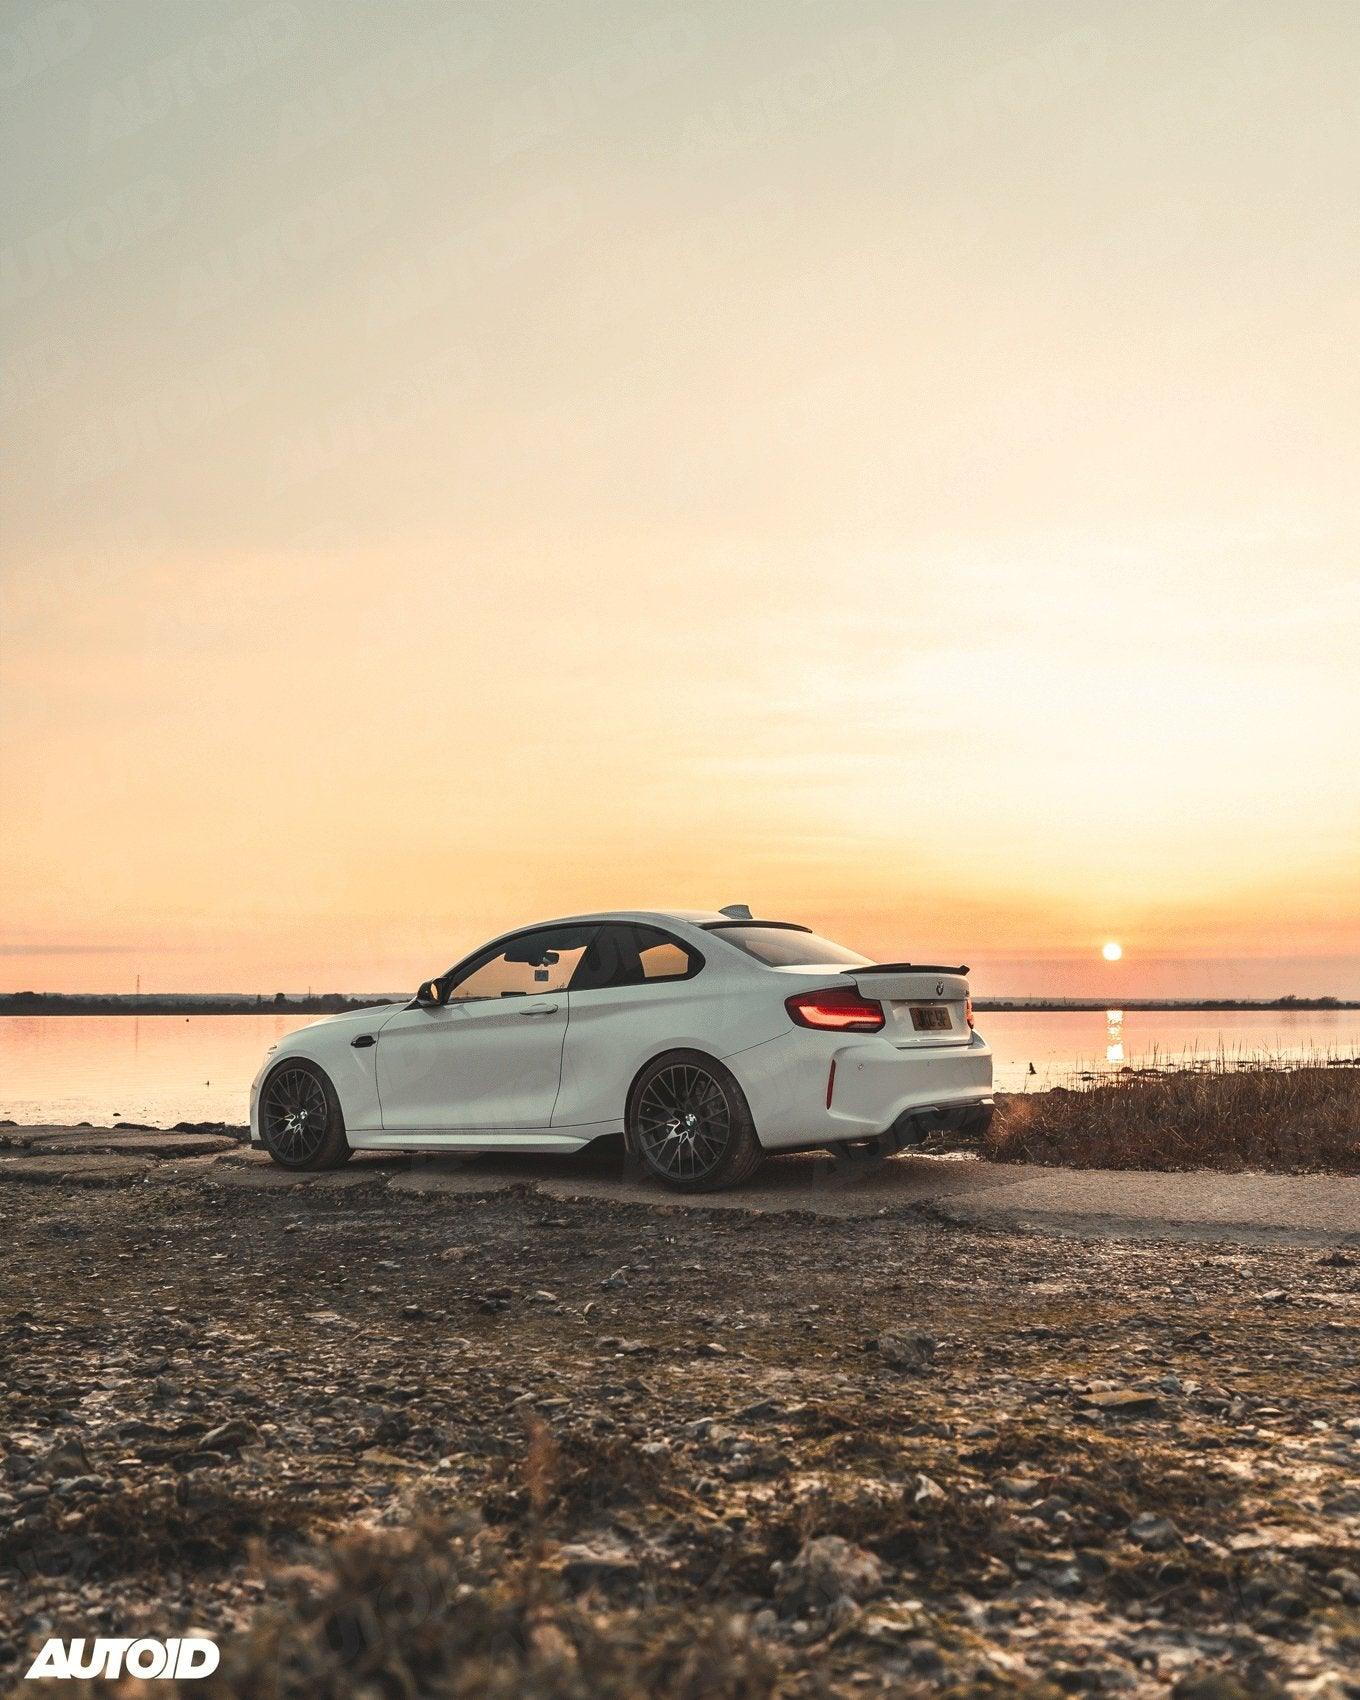 AUTOID's take on the BMW M2 Competition. - AUTOID